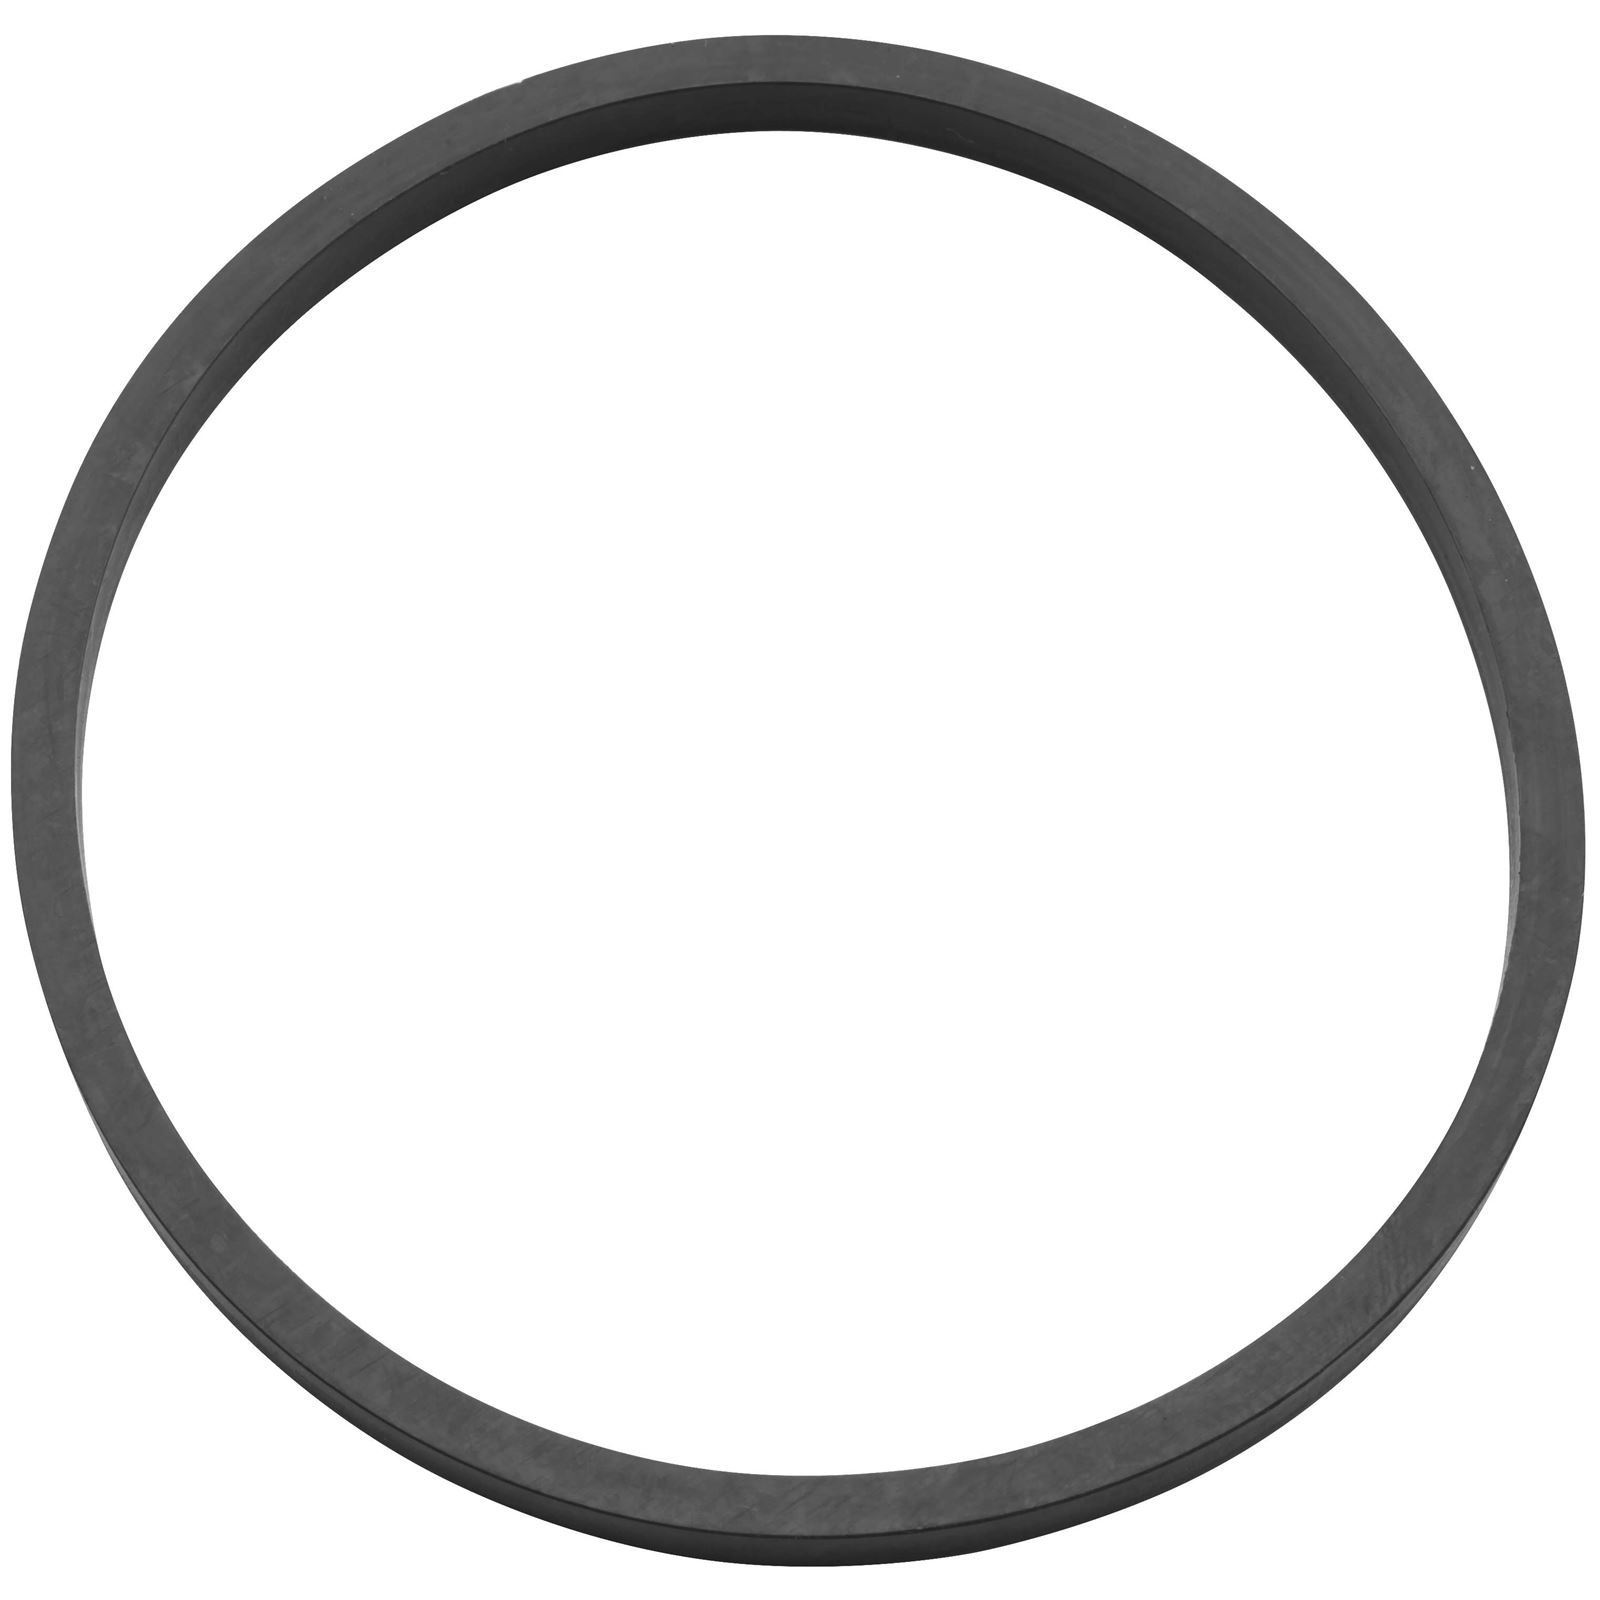 PCRacing Flo Stainless Steel Oil Filter Seal Ring